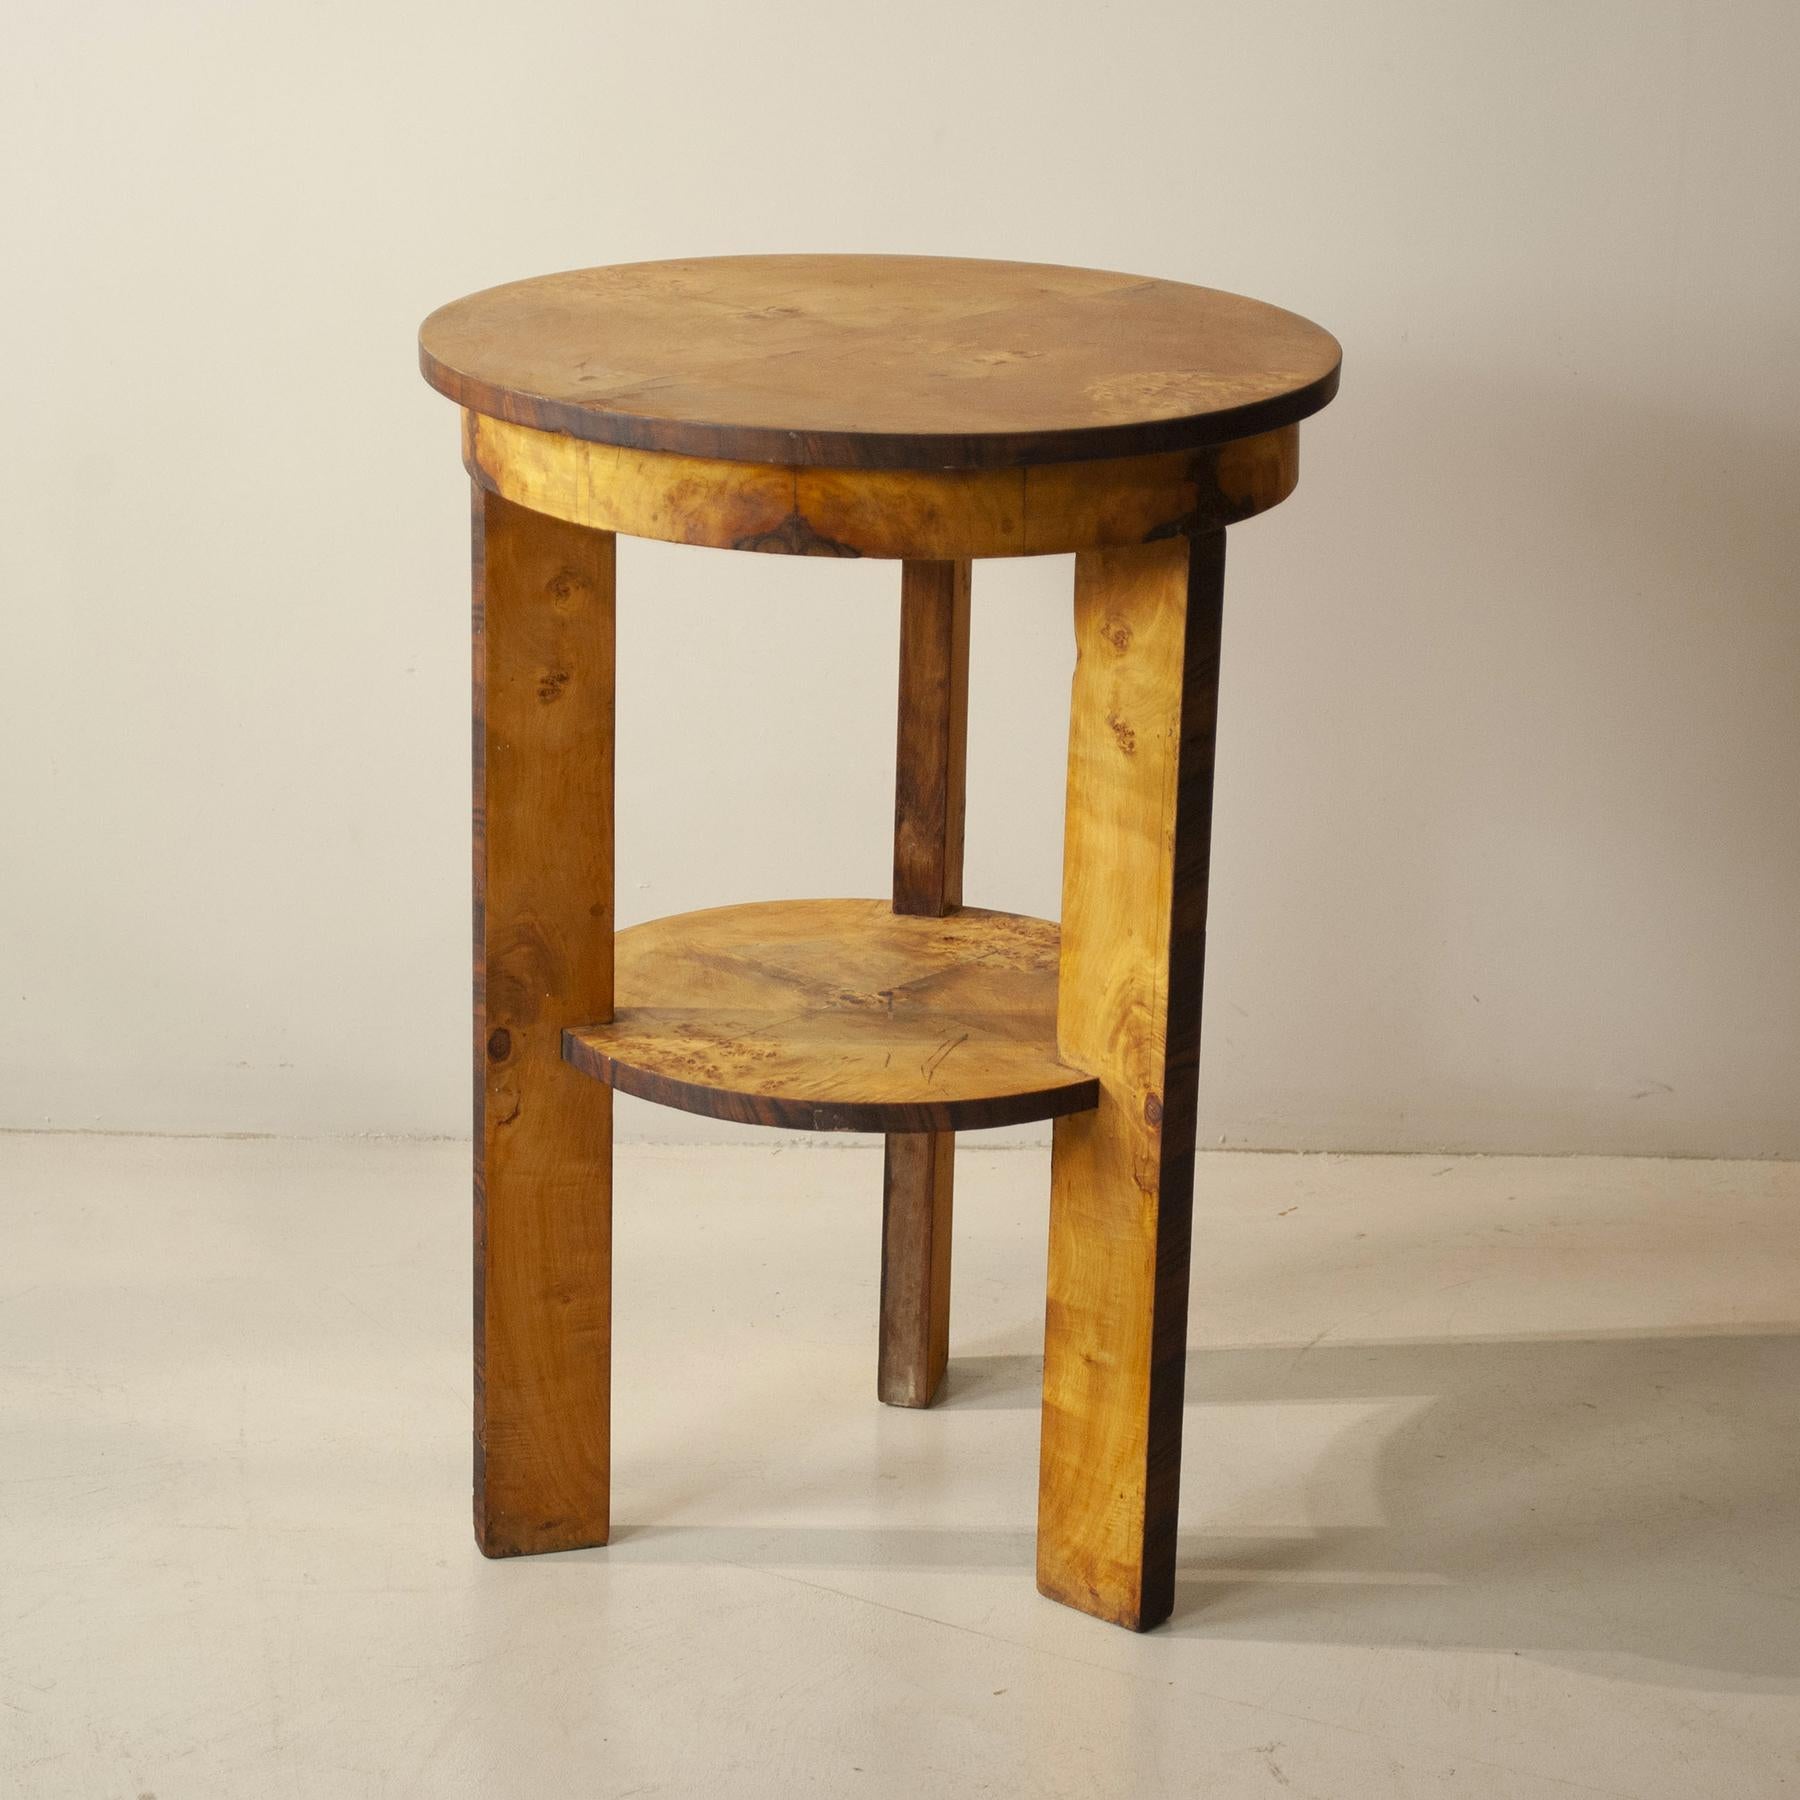 Giuseppe Pagano Italian Midcentury Art Deco Side Table 40's In Good Condition For Sale In bari, IT